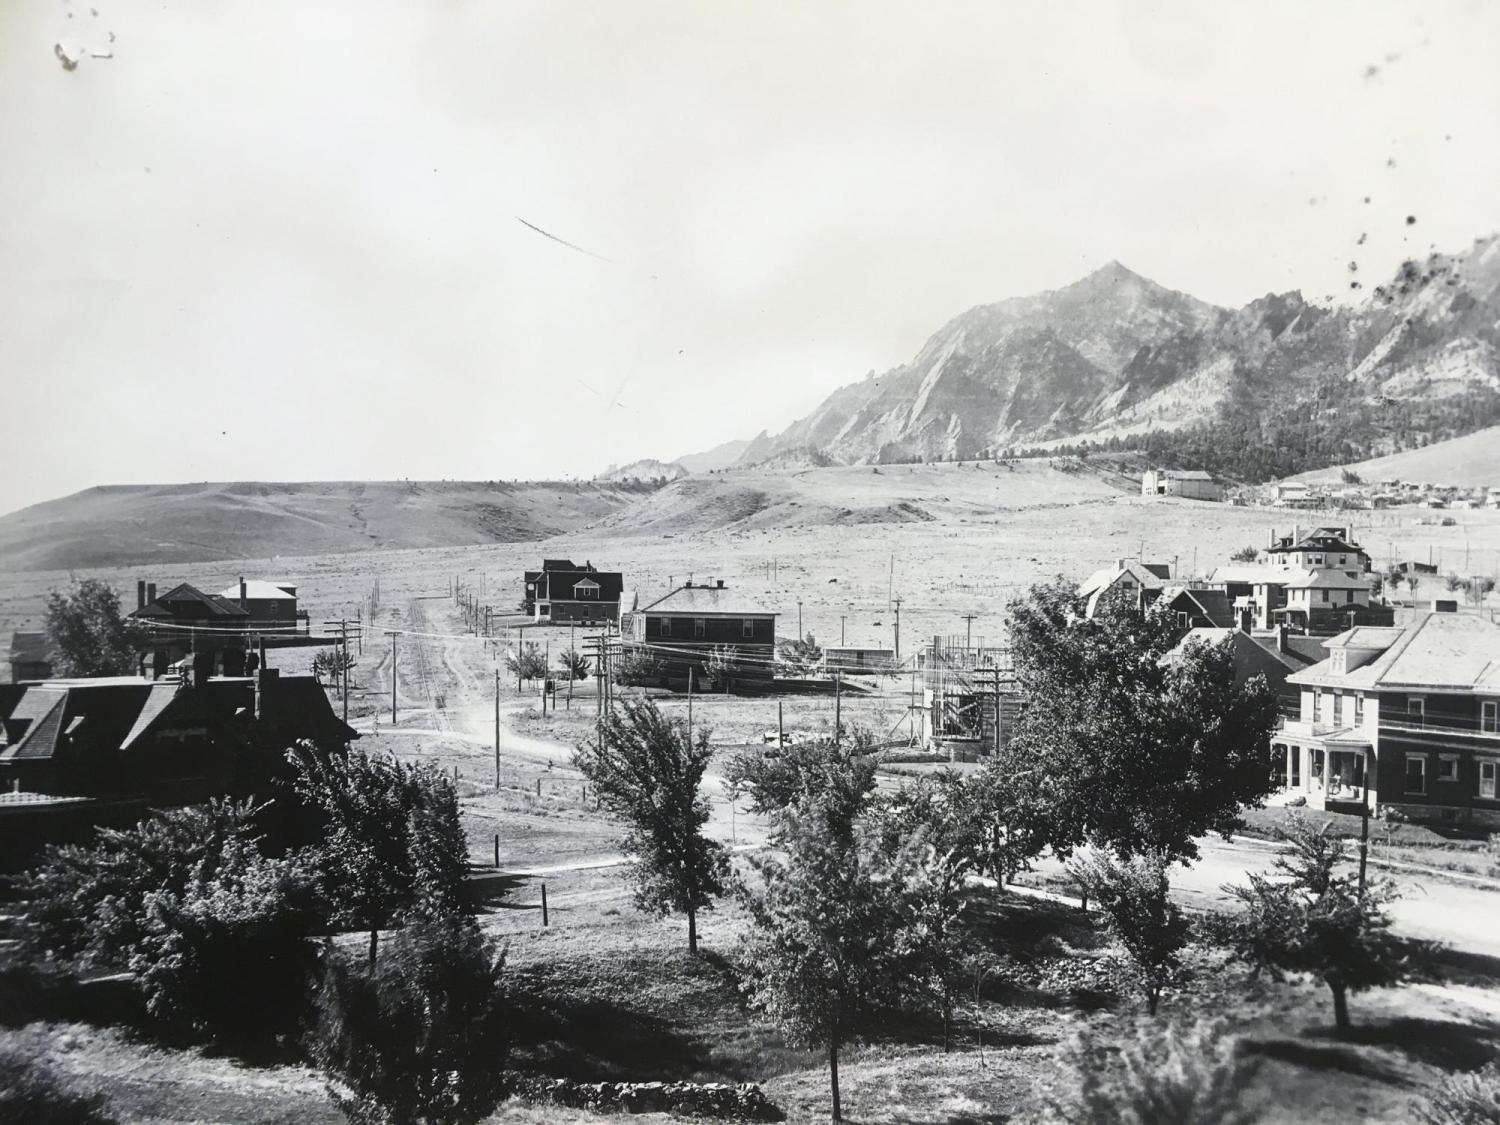 CU Boulder's the Hill neighborhood, as it looked at the turn of the 20th century.